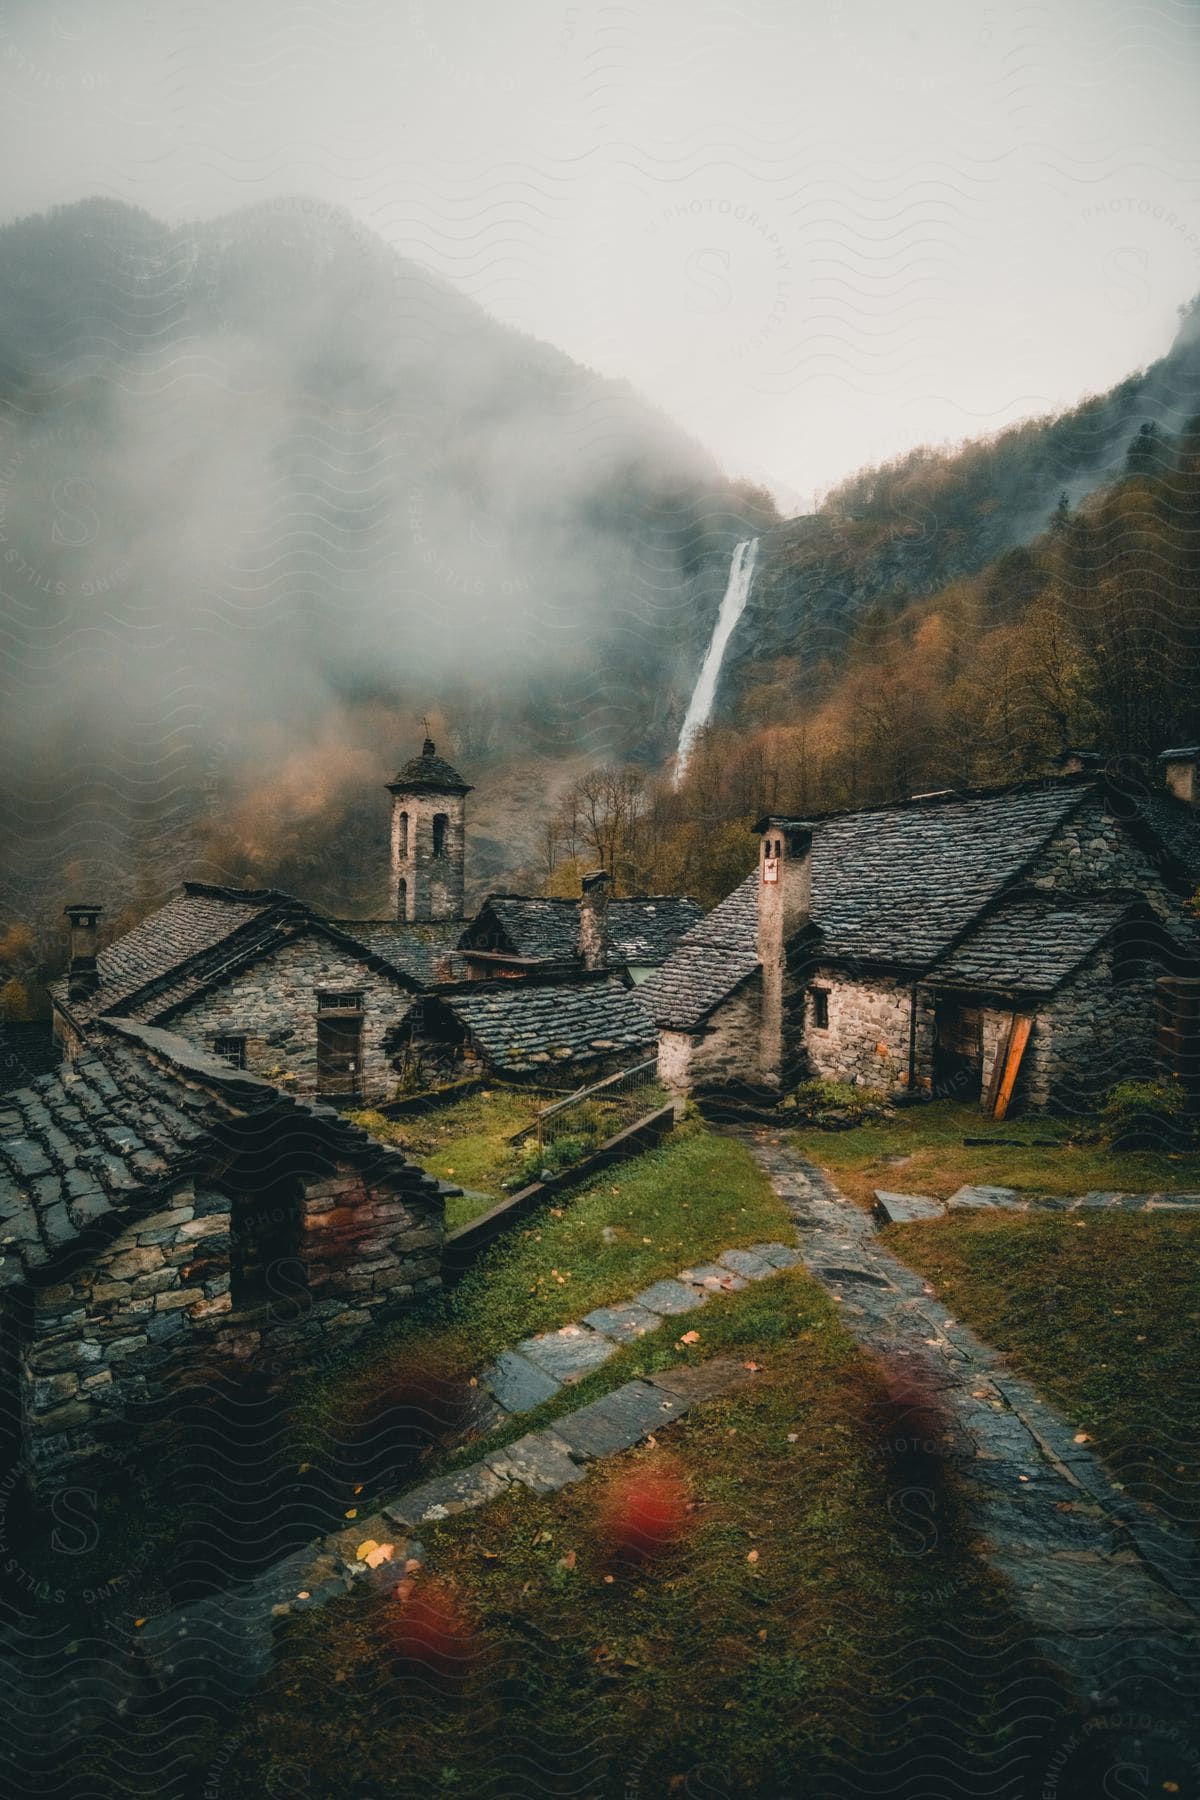 Stock photo of houses made of stone in foroglio, a village tucked away in the bavona valley, located in the canton of ticino, switzerland.